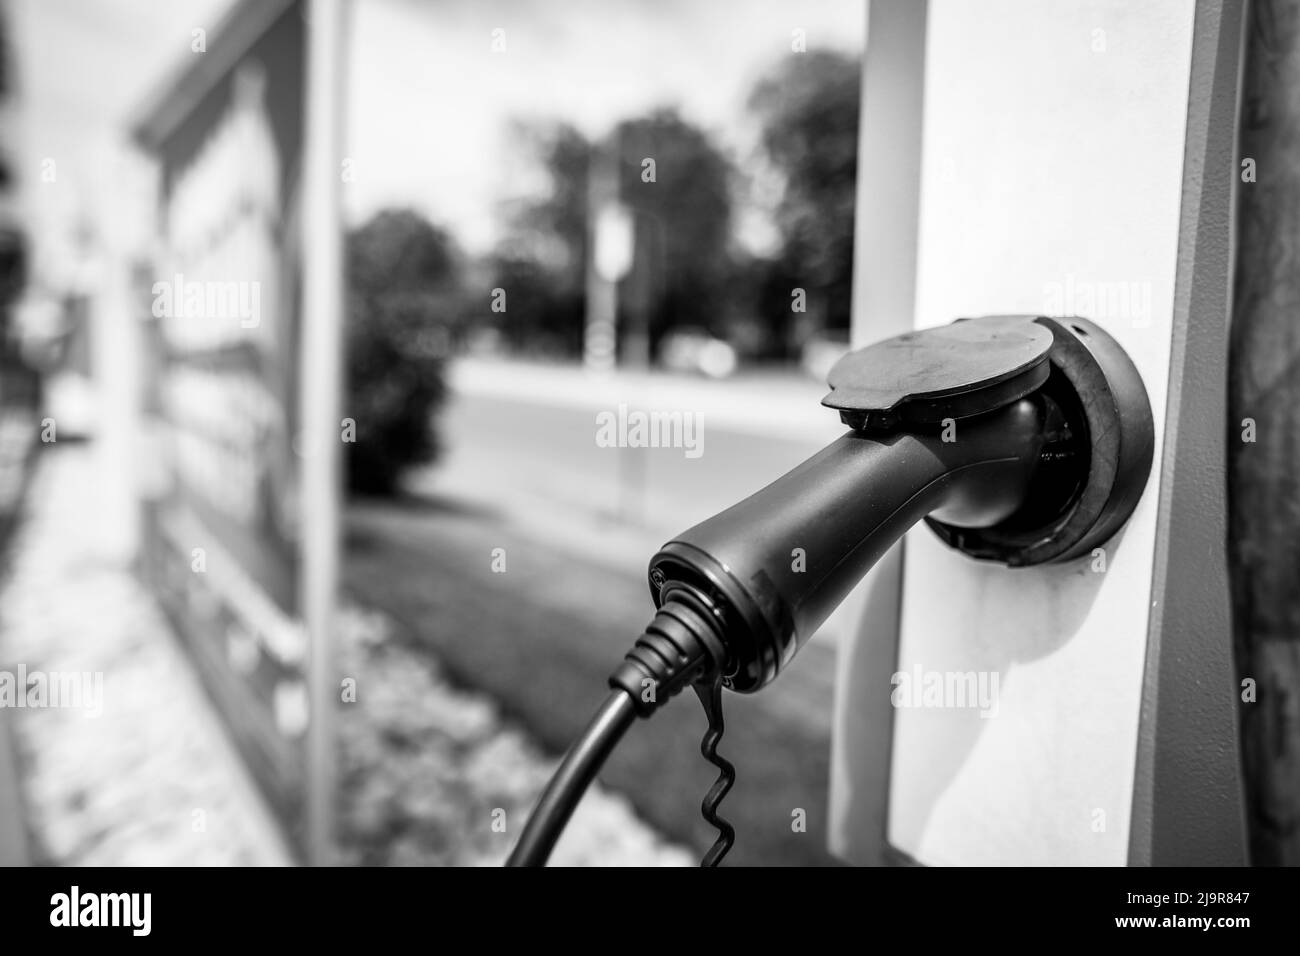 Shallow depth of field (selective focus) details with auto electric plug or socket at an electric vehicle charging station. Stock Photo